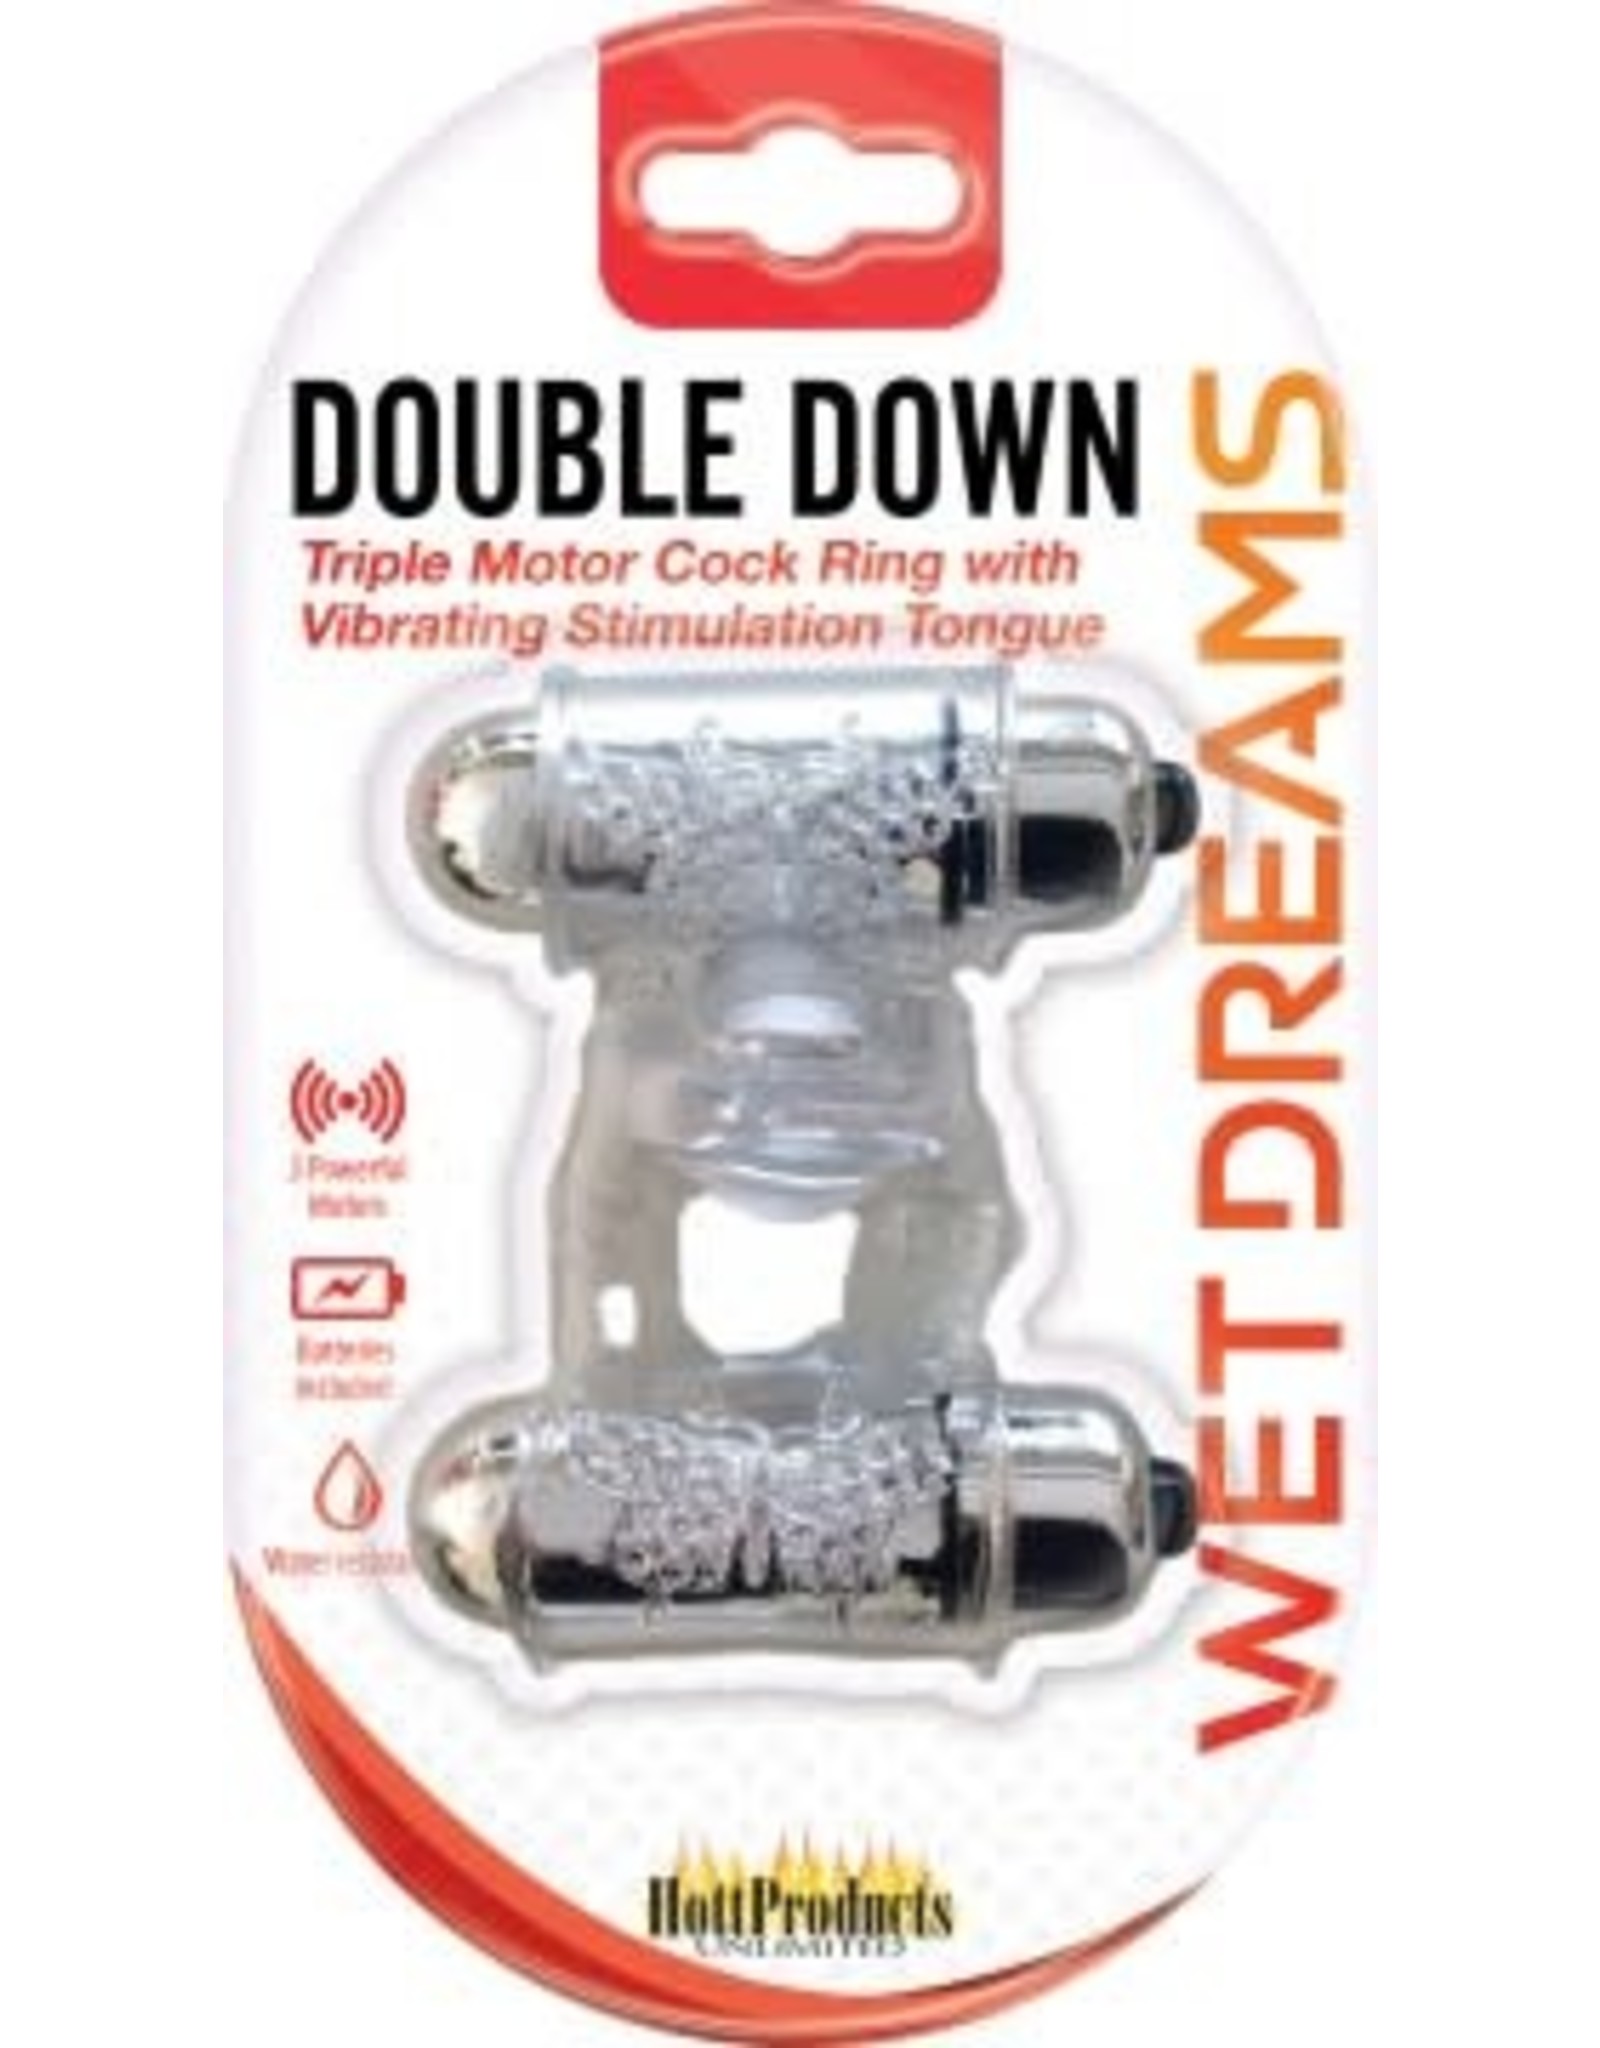 DOUBLE DOWN RING